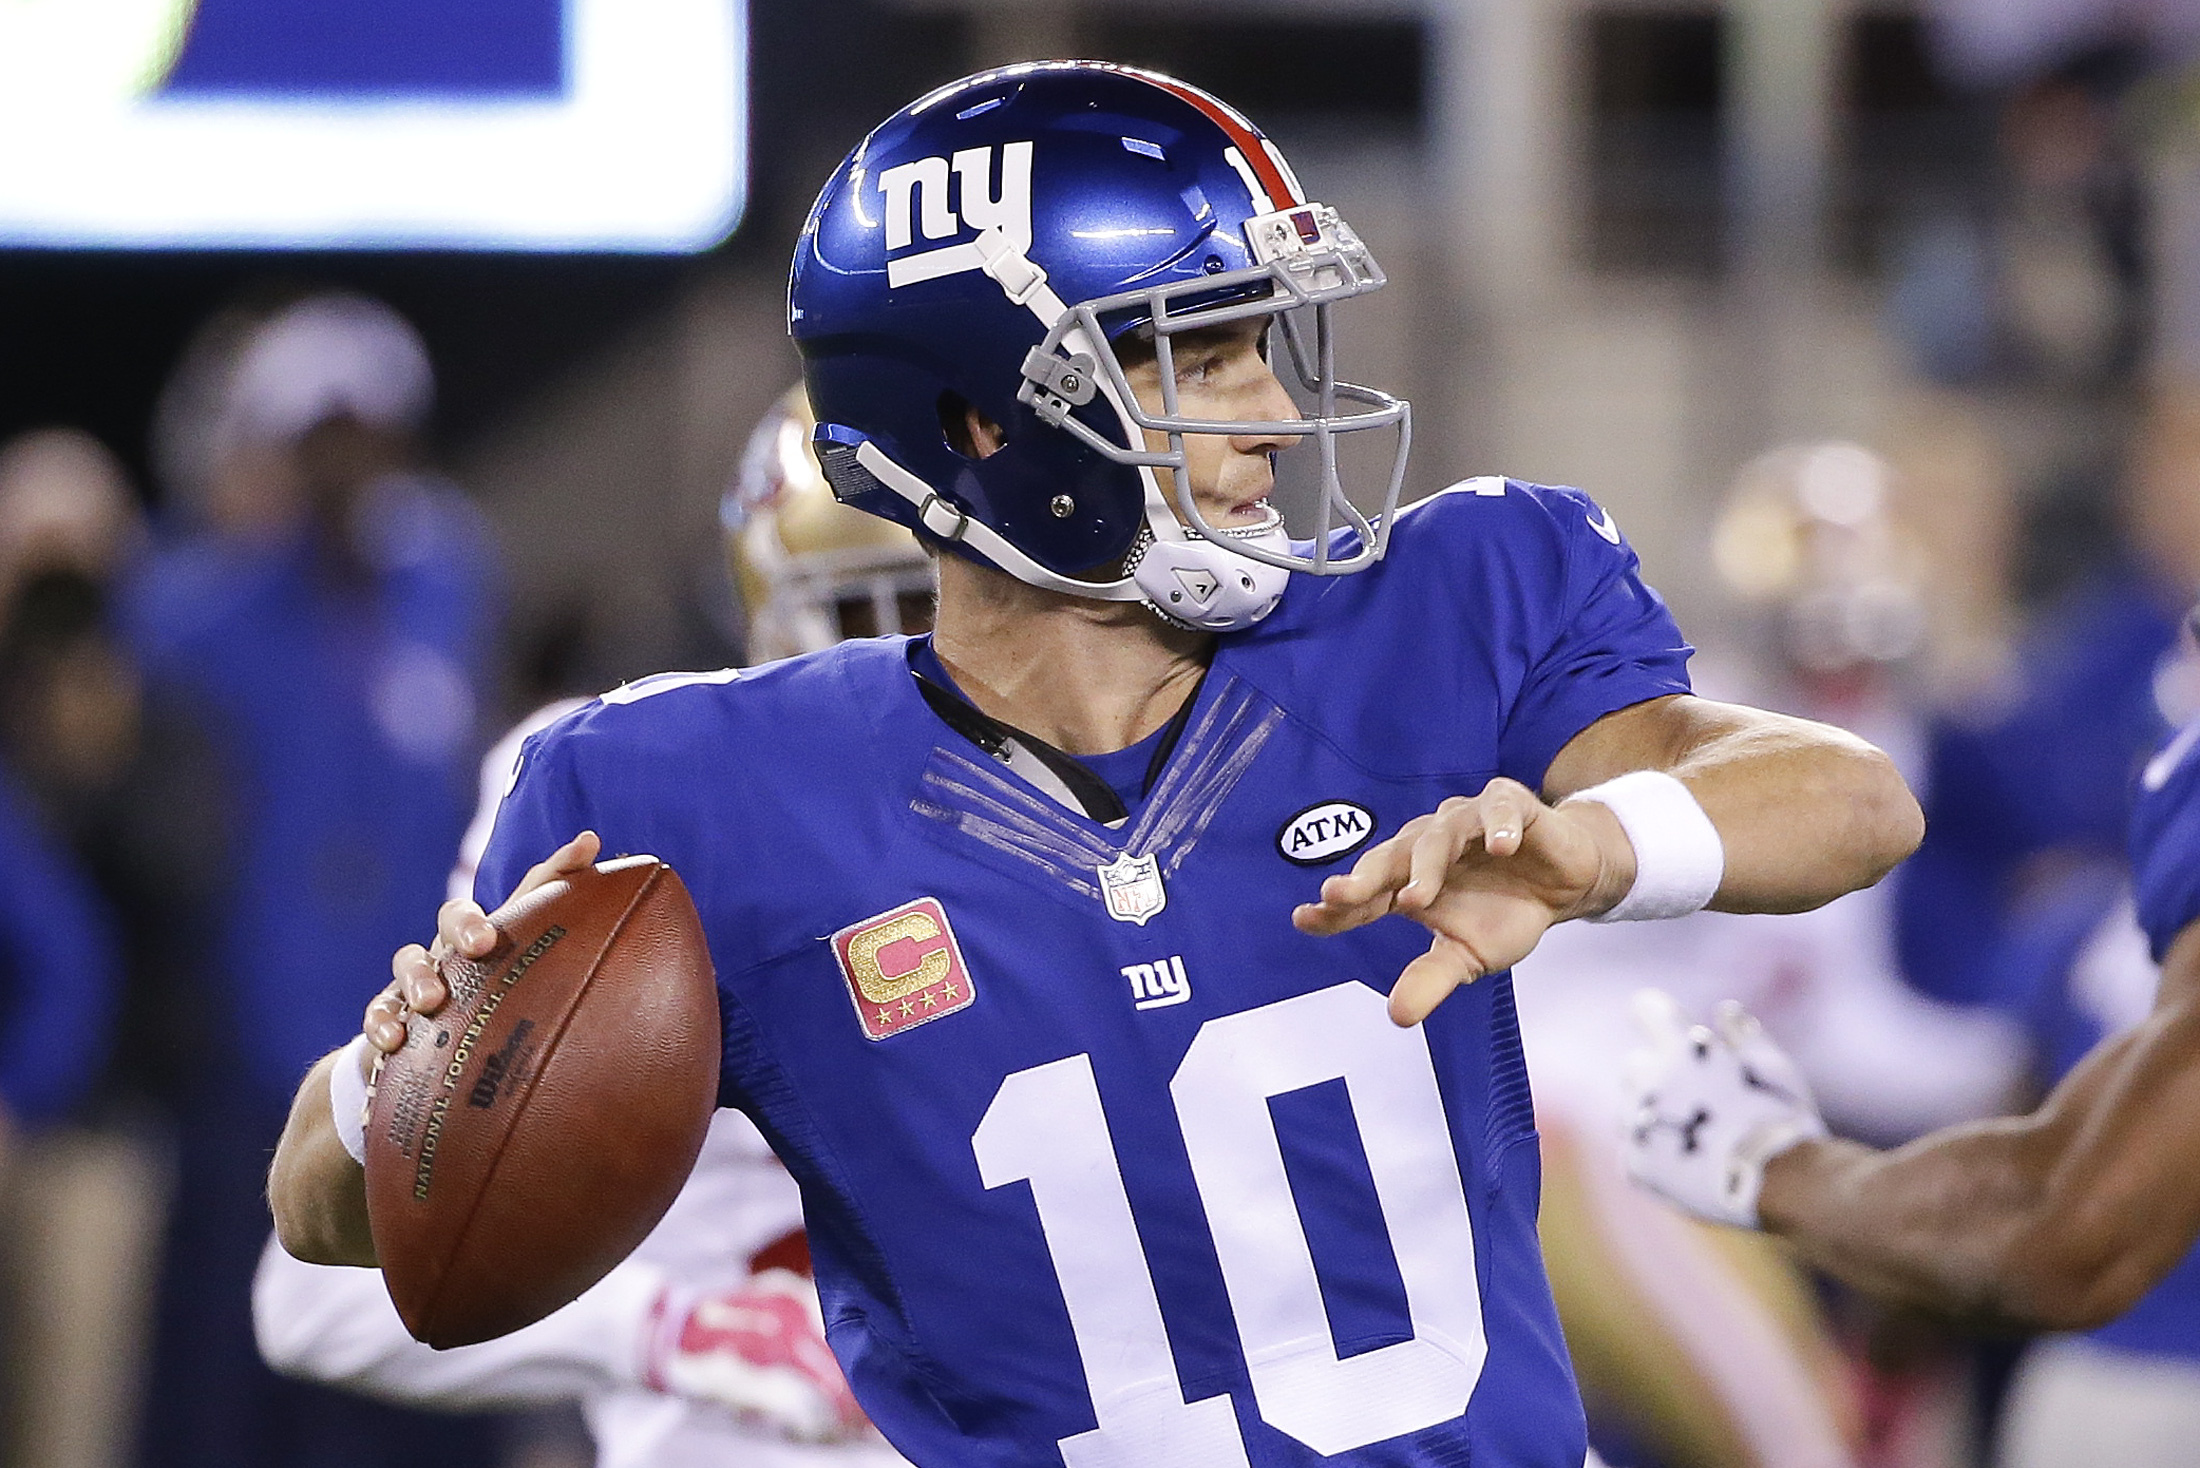 Eli Manning: Giants went 9-7, have to get better - NBC Sports